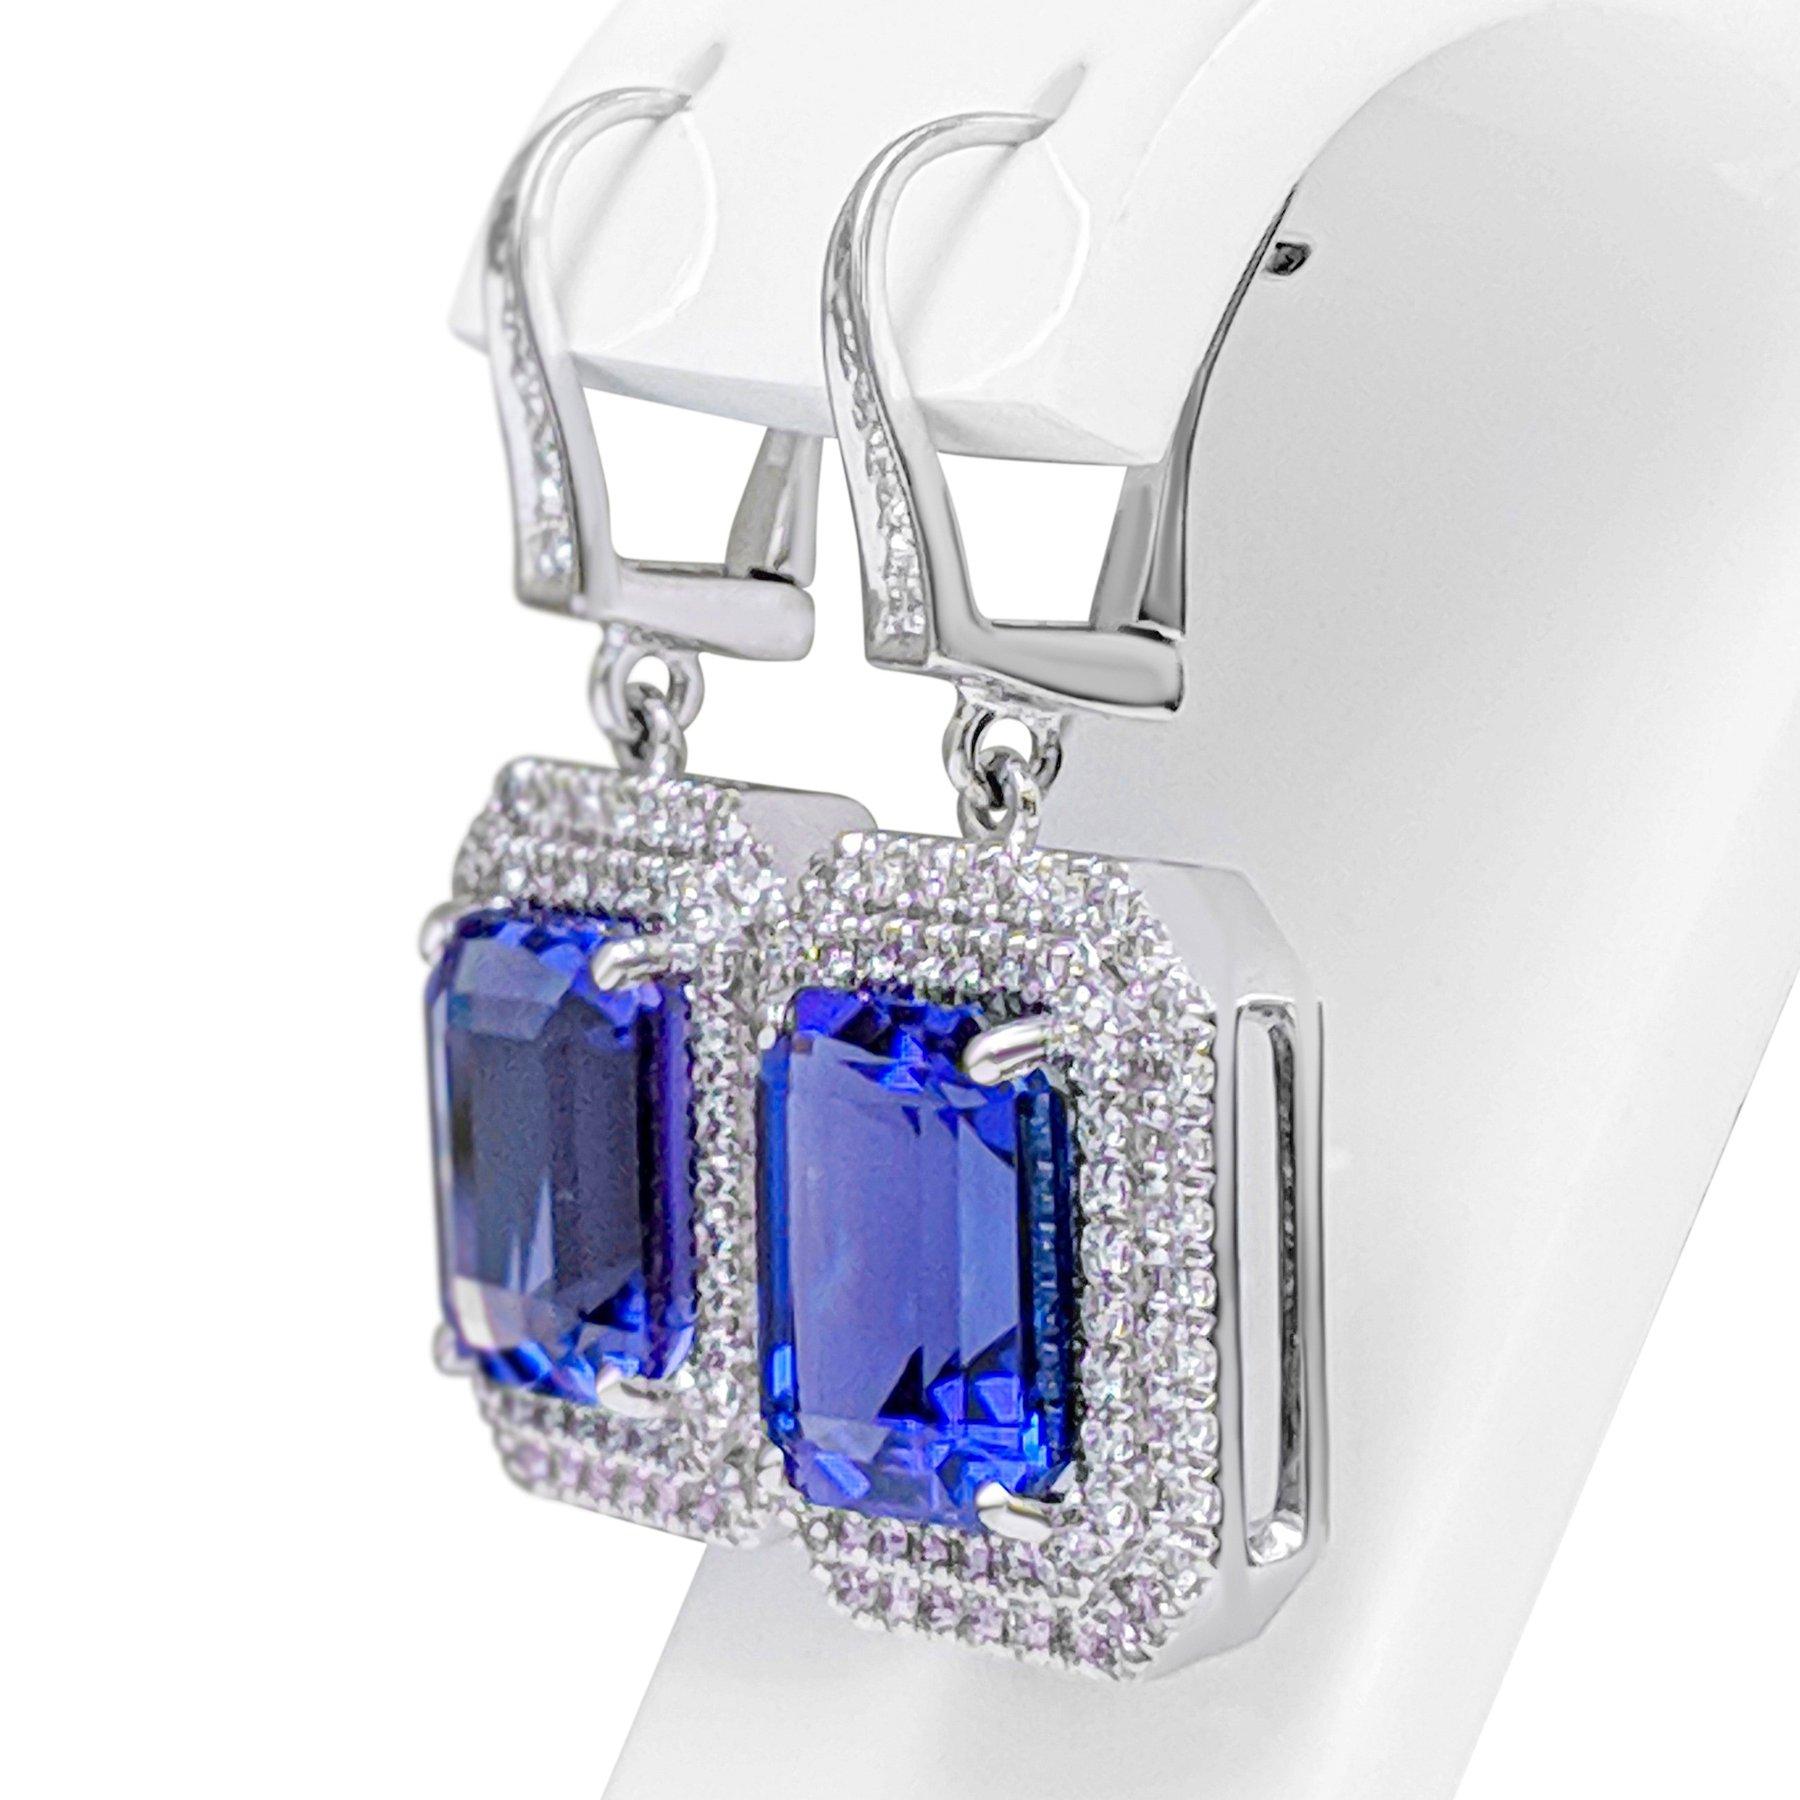 Art Deco 10.30 Carat Tanzanite and 1.25Ct Diamonds Halo - 18 kt. White gold - Earrings For Sale